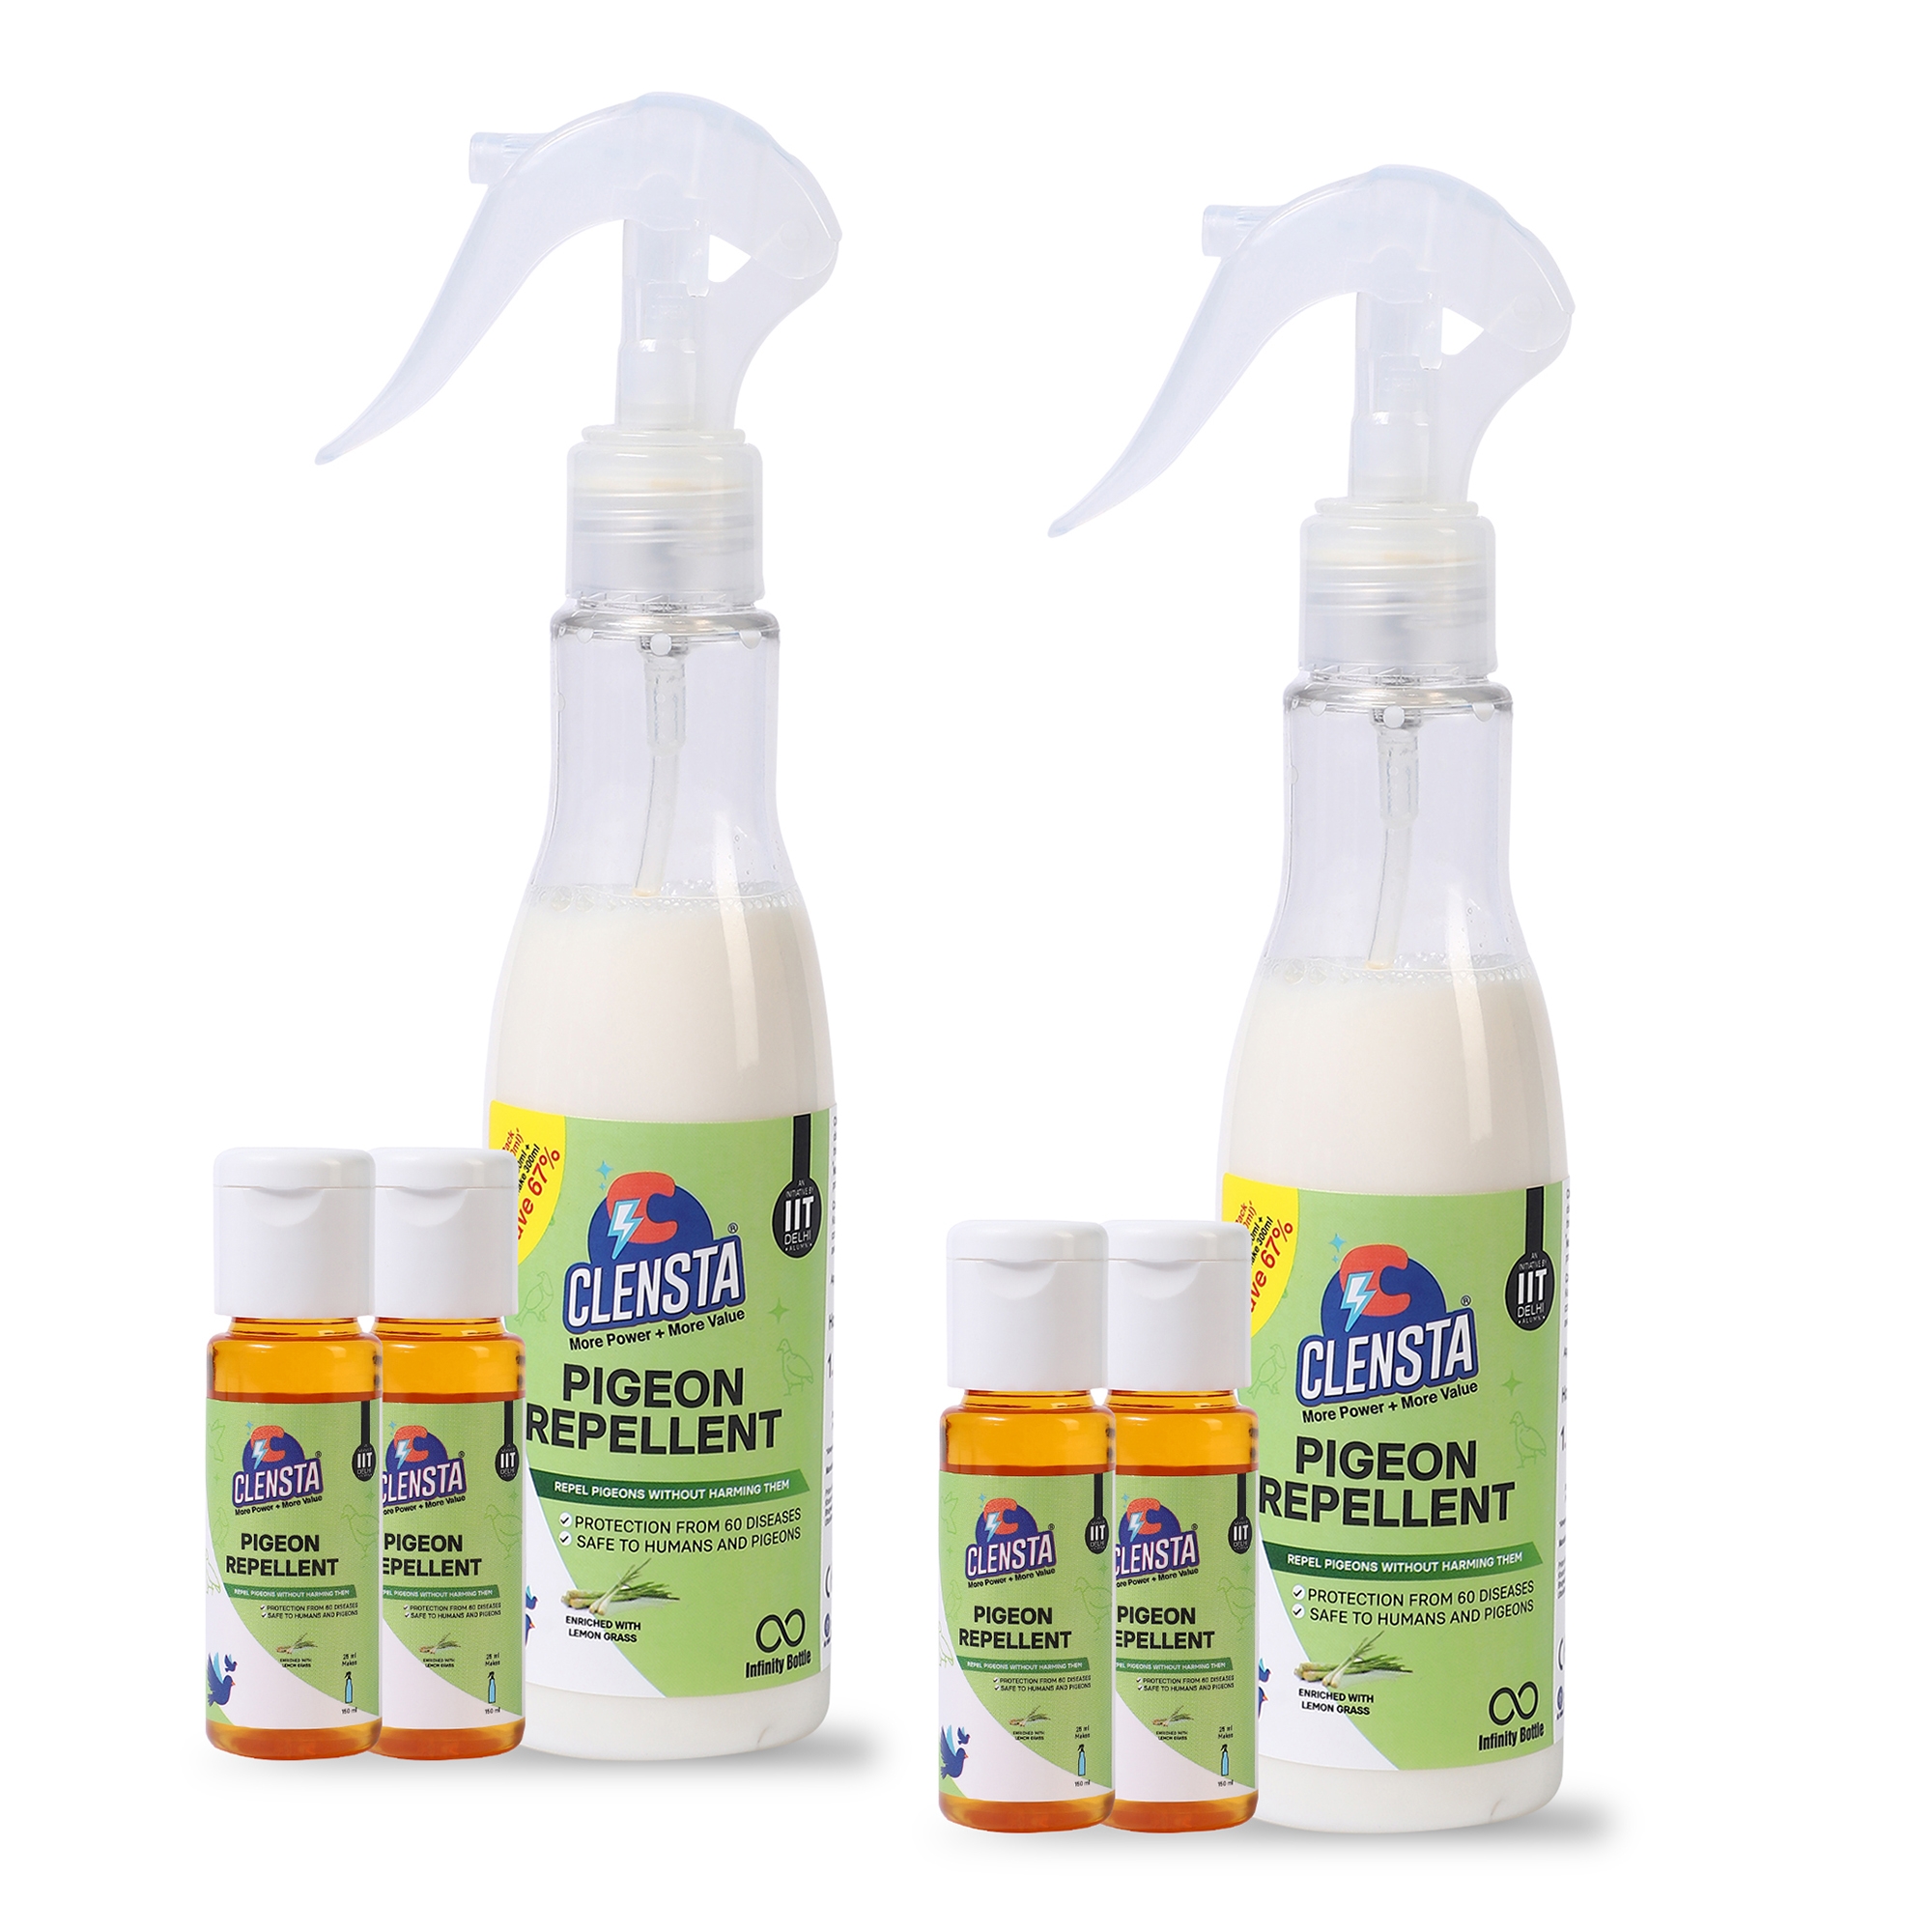 Clensta Pigeon Repellent Spray | Harmless for Pigeon | Get Positive Results in 10 days | 1 Bottle (150 ml) & 2 Concentrates (Makes 300 ml) | Pack of 2